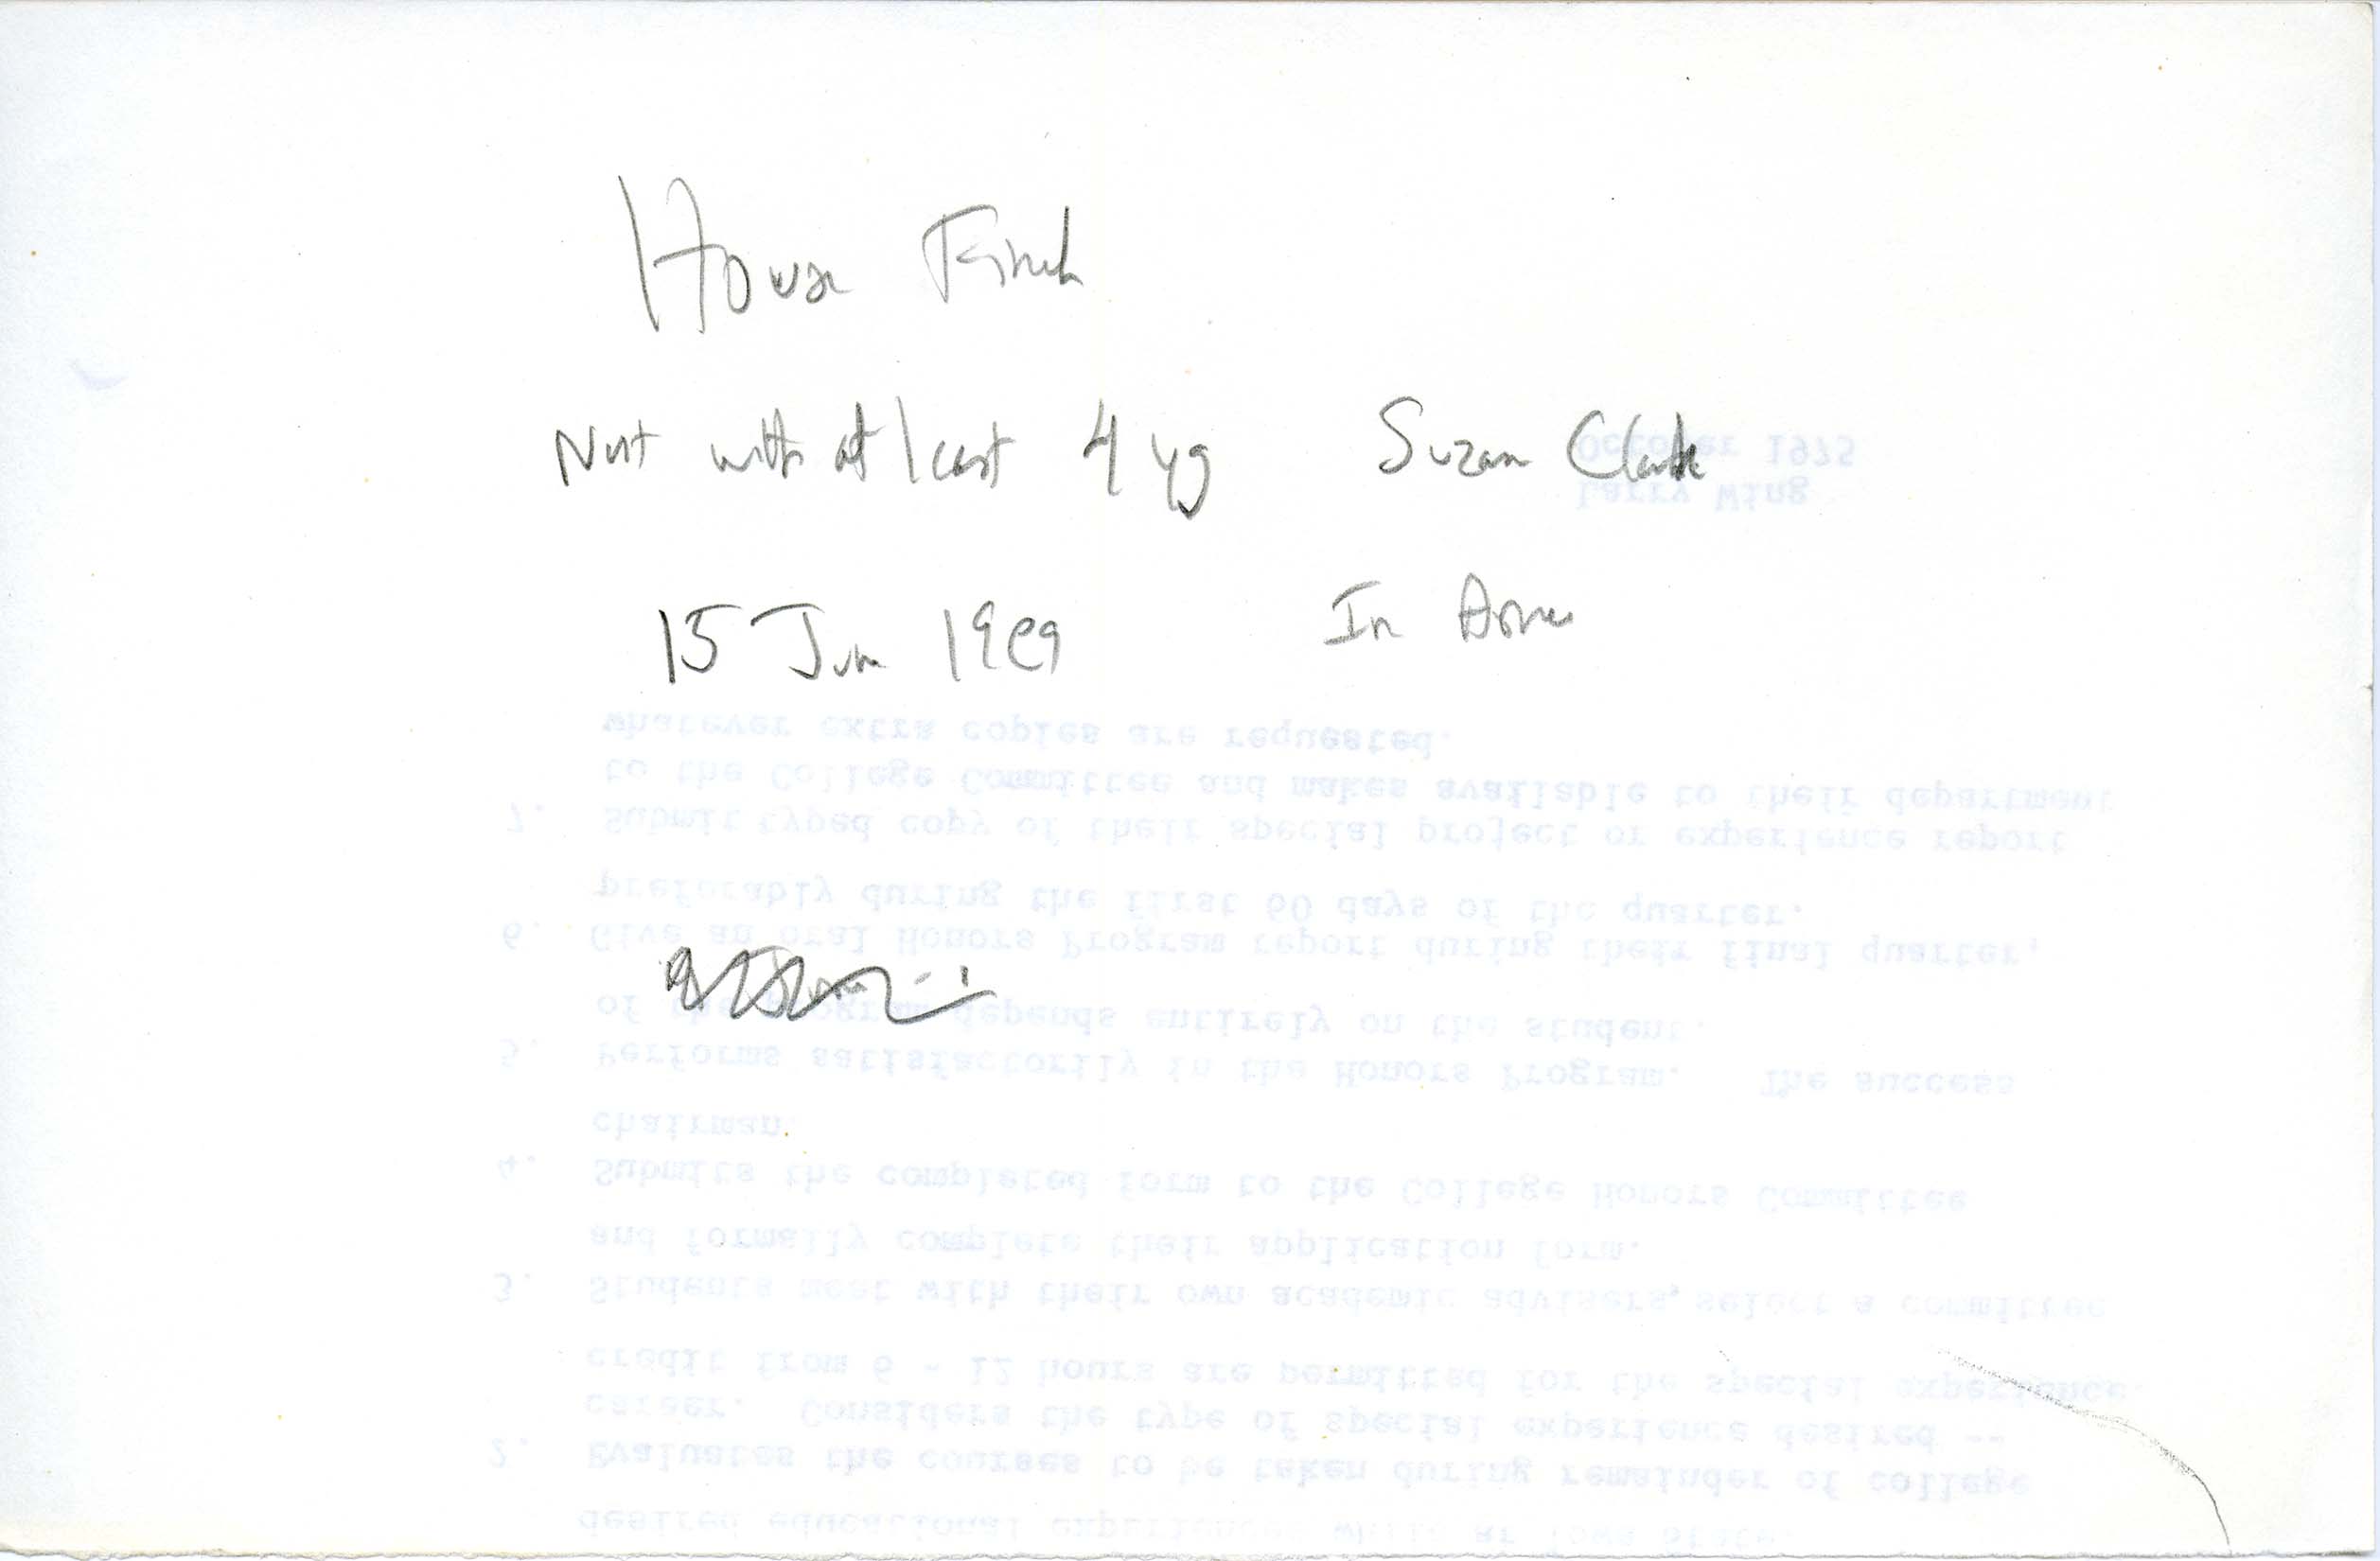 Field note about a House Finch sighting contributed by Suzanne Clark, June 15, 1989